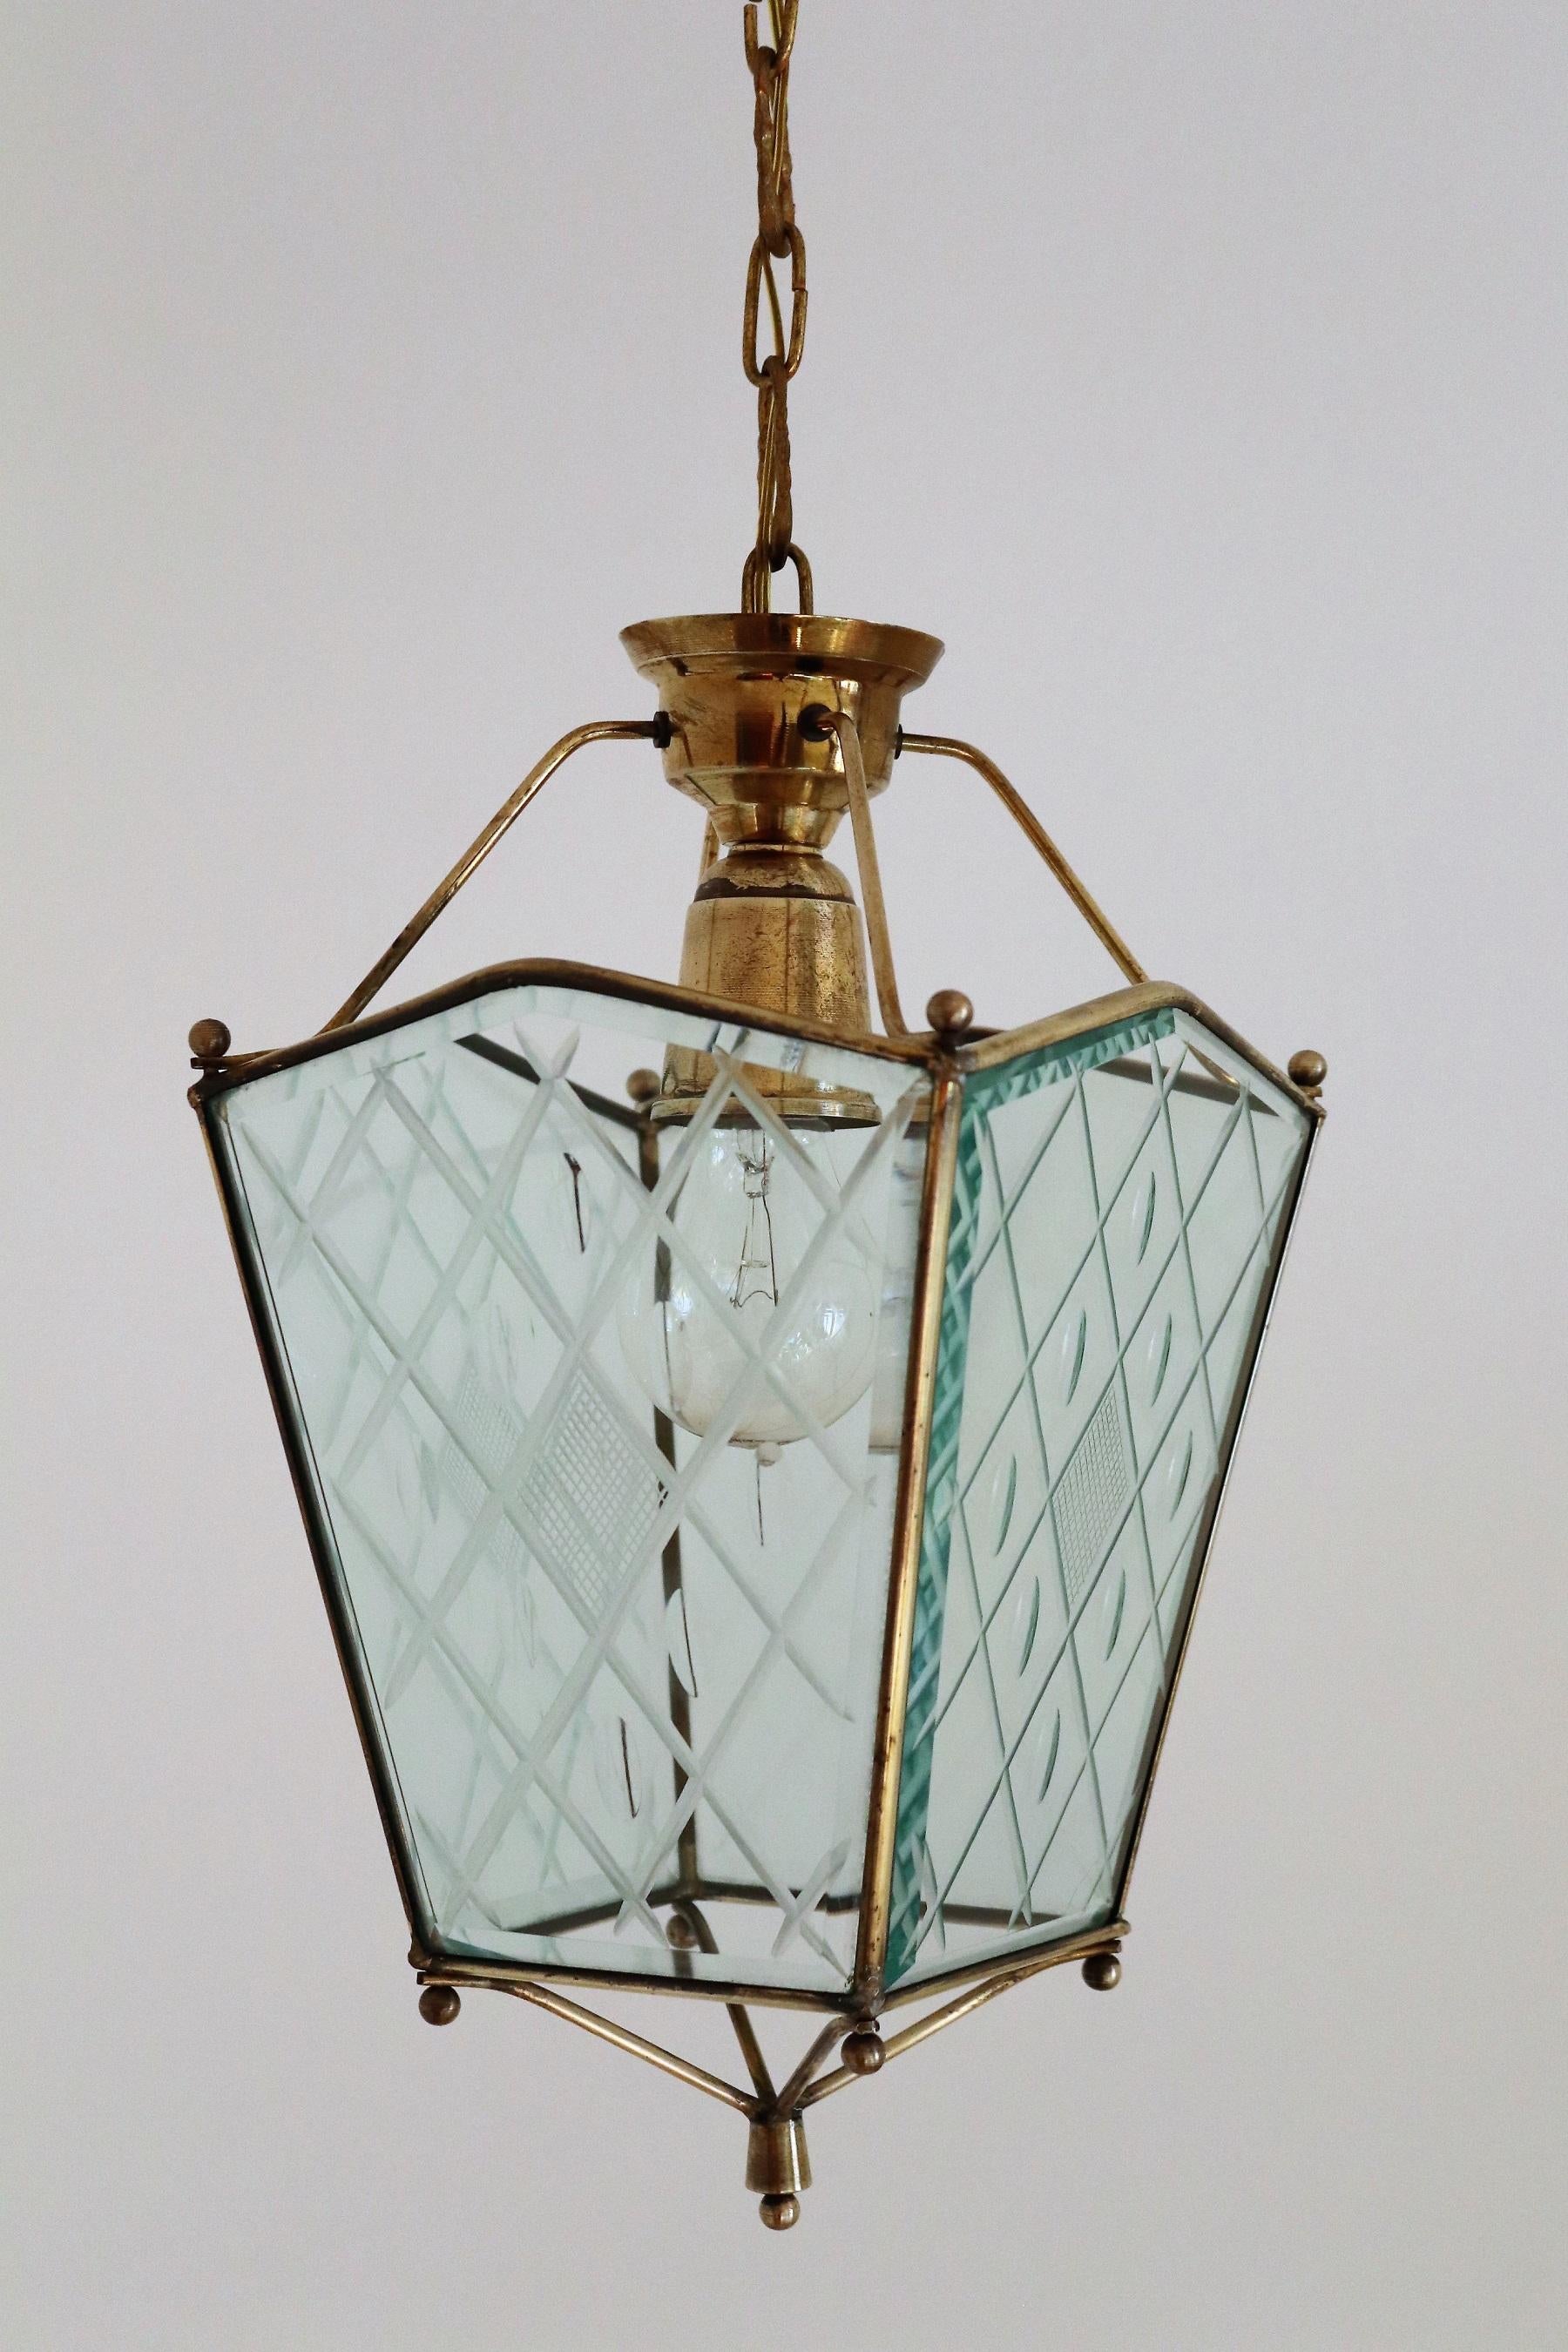 Italian Vintage Lantern in Crystal Cut Glass and Brass, 1950s For Sale 2